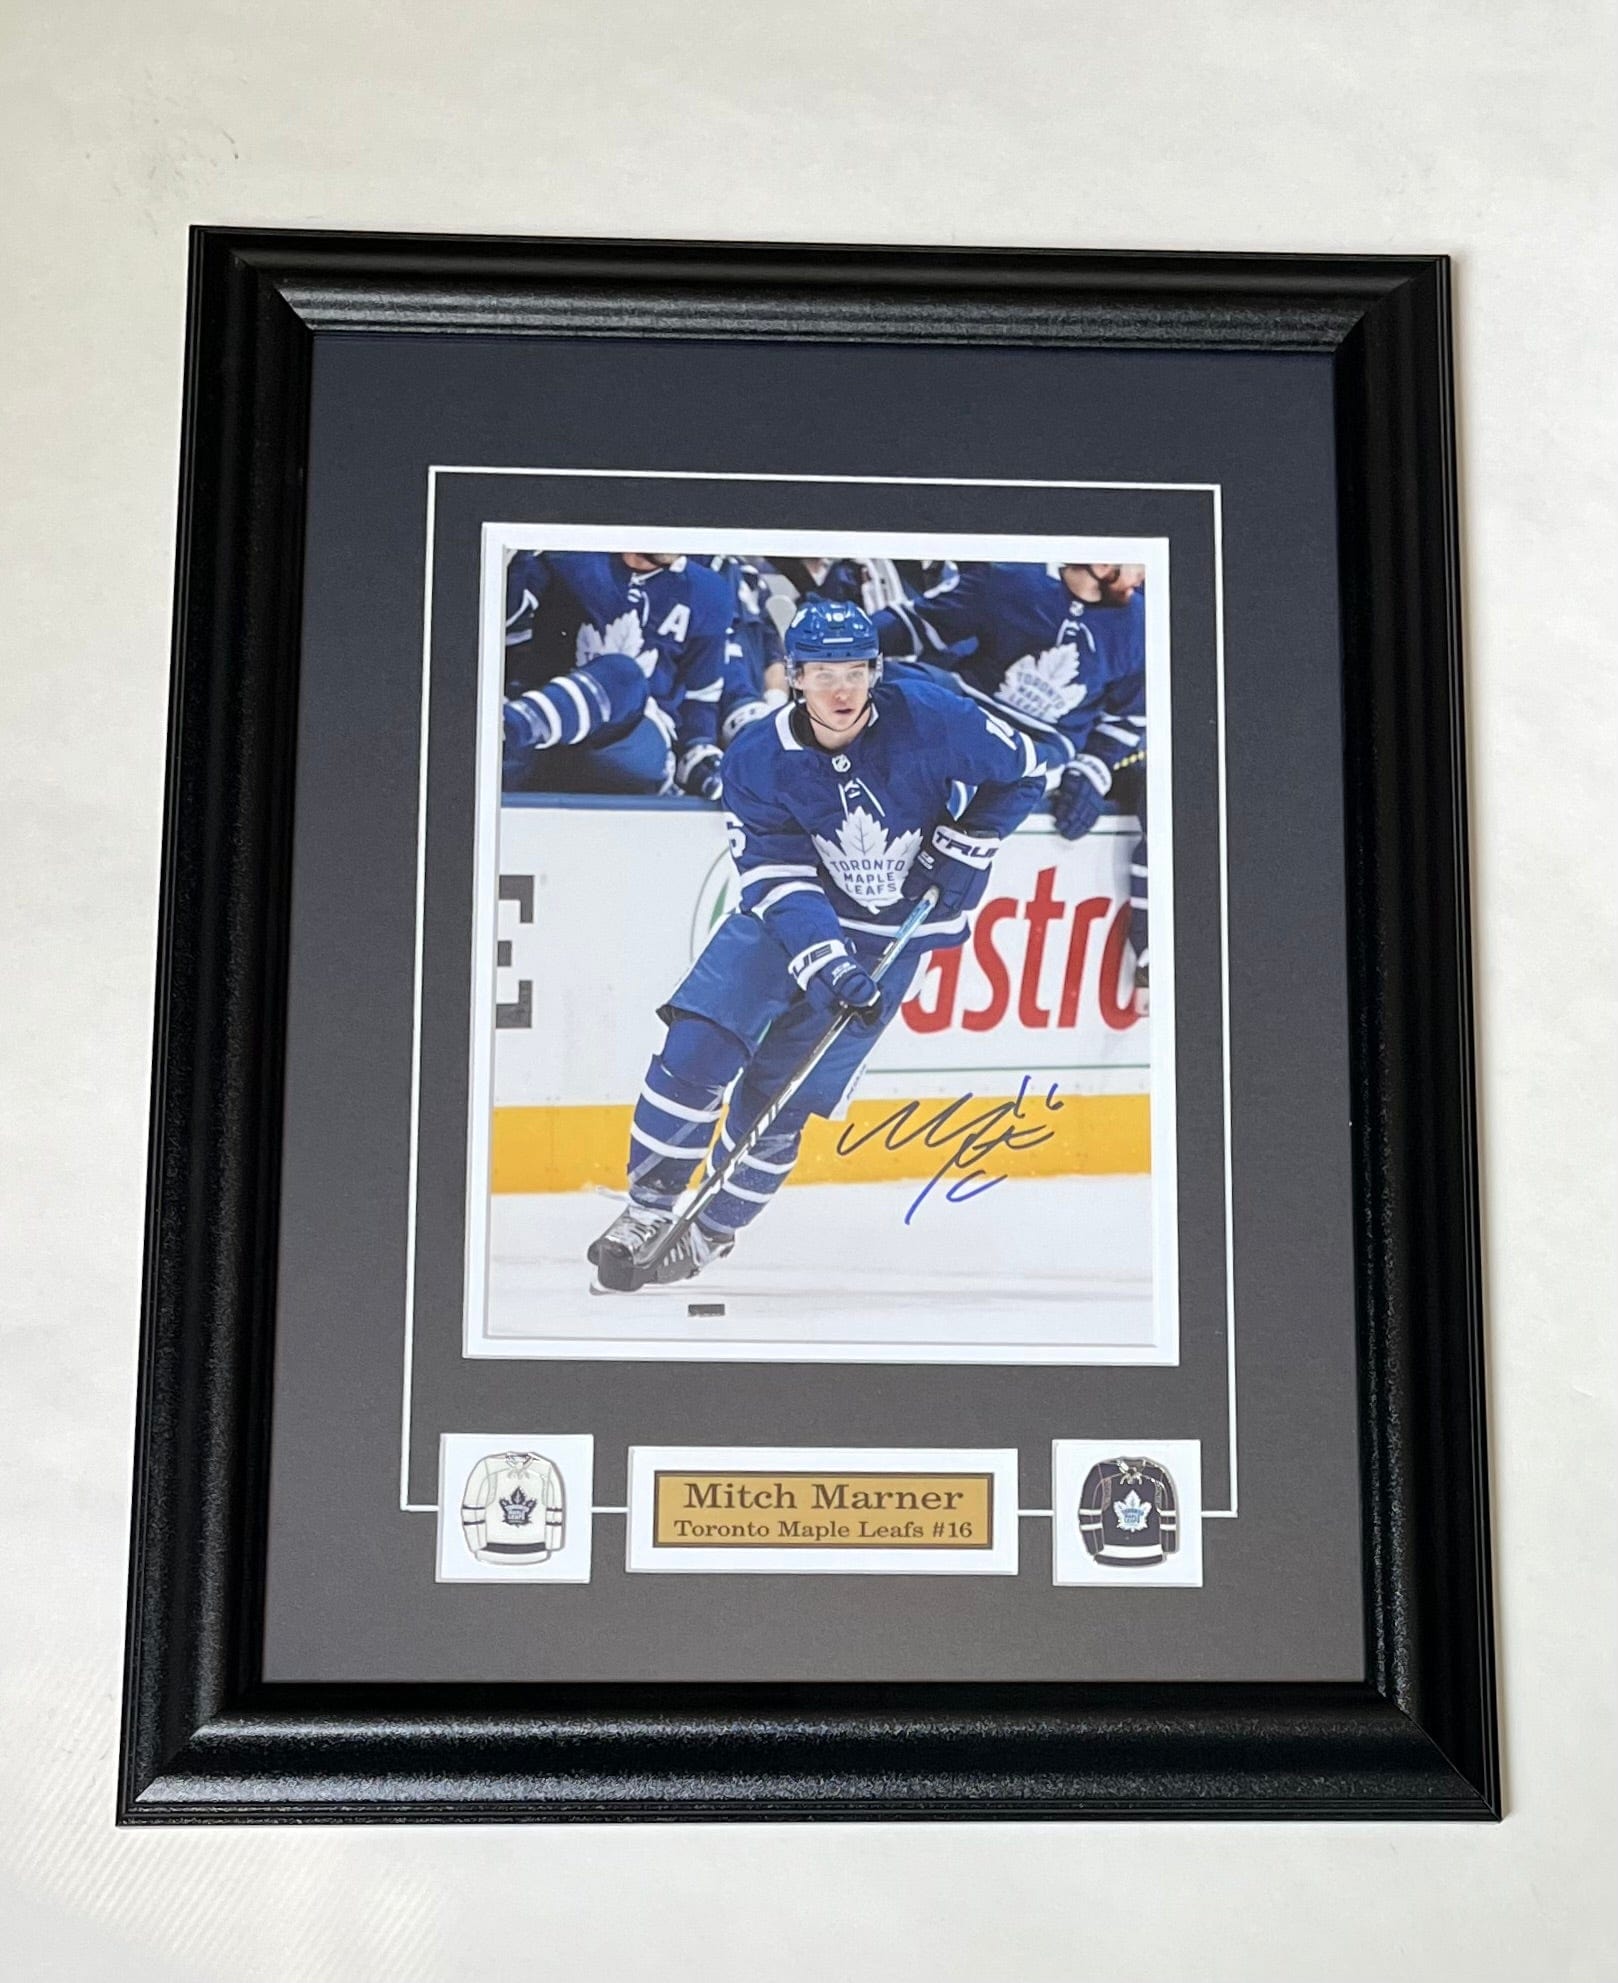 Mitch Marner Toronto maple leafs autographed framed 